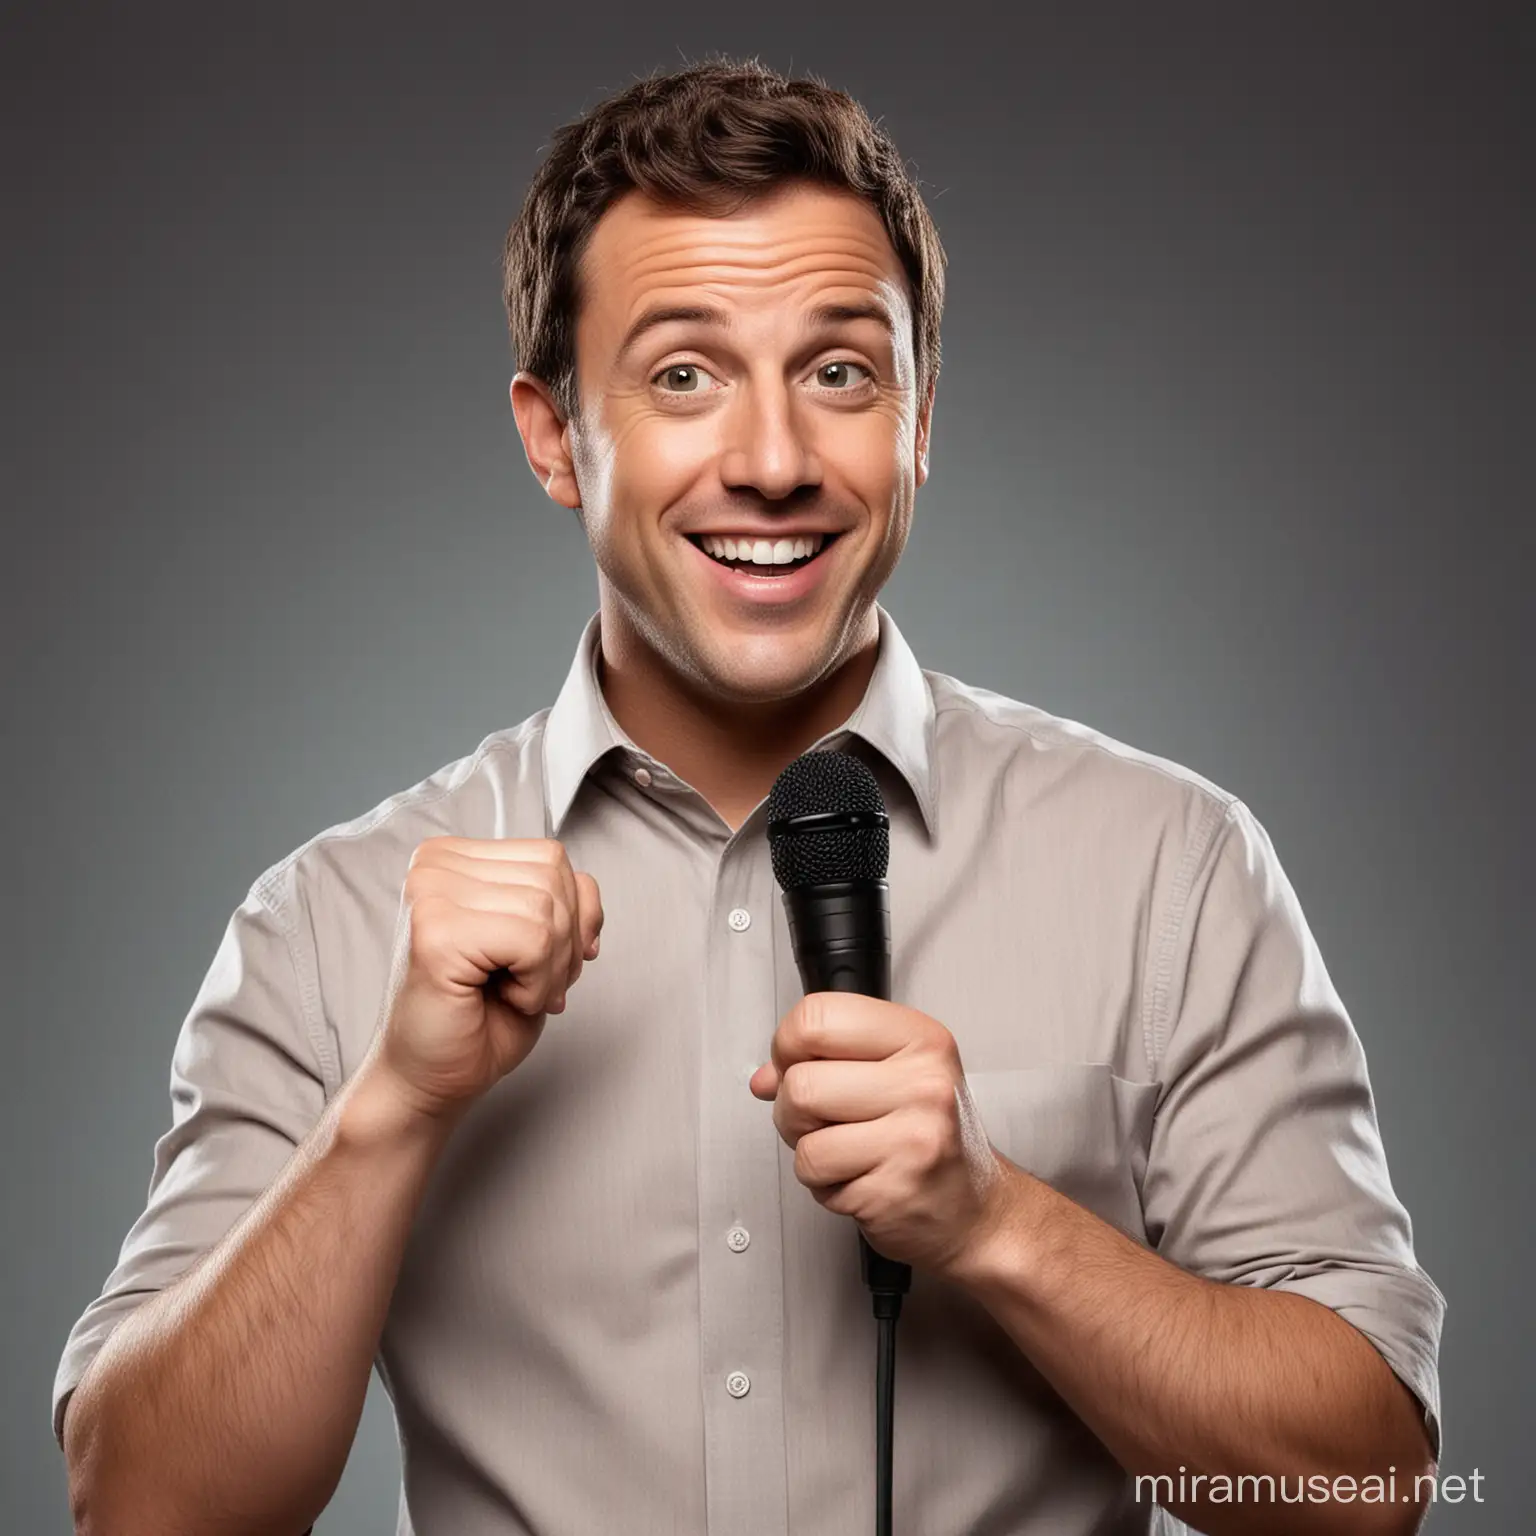 StandUp Comedian Host Holding Microphone Portrait